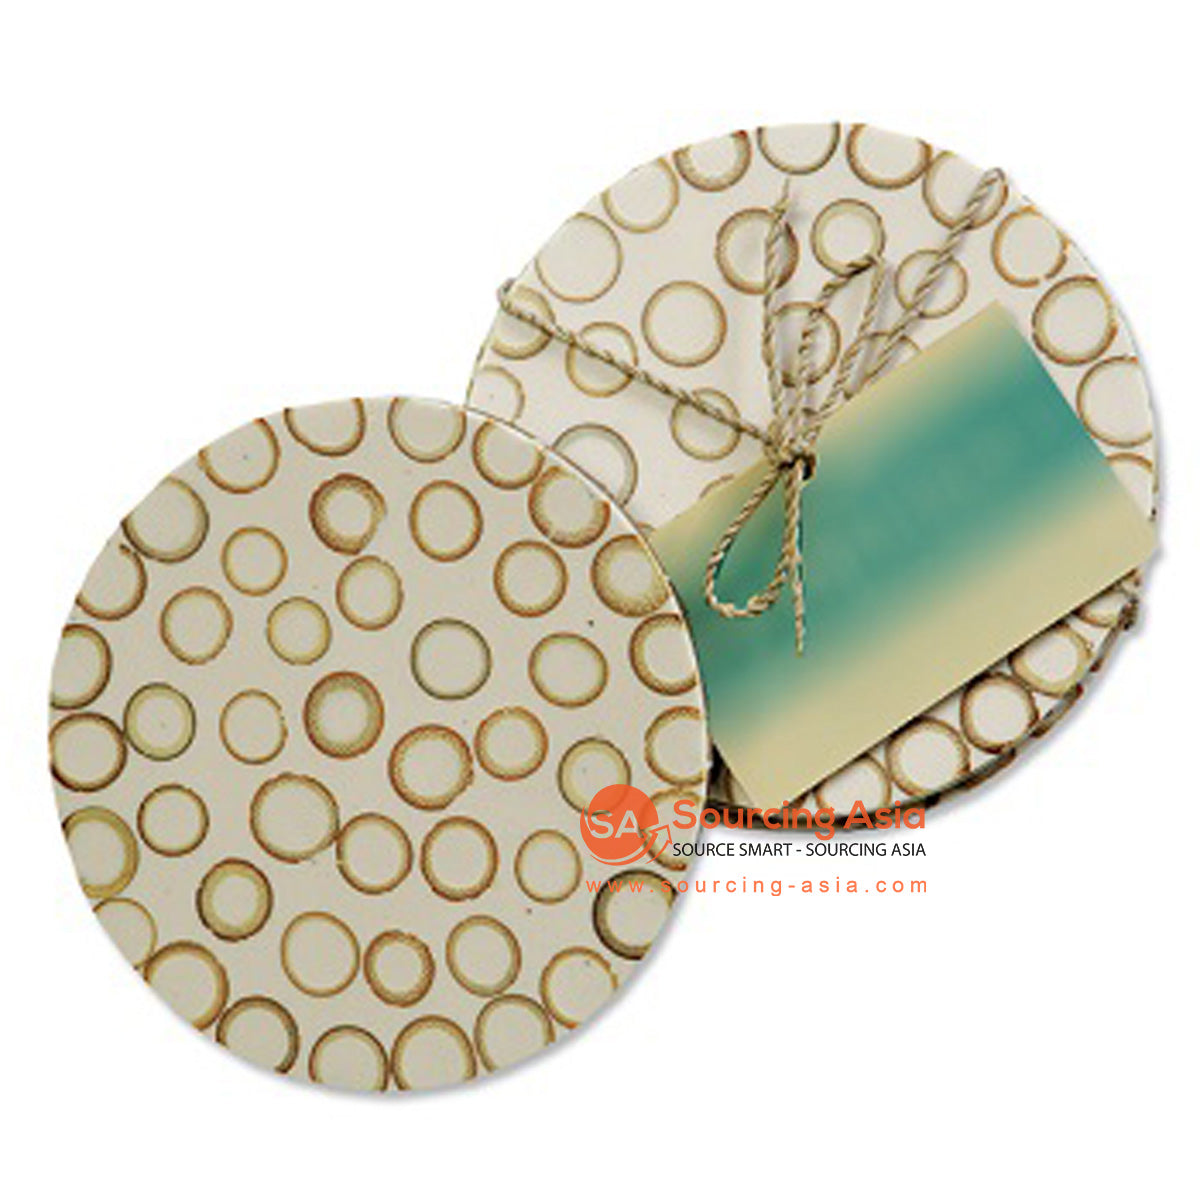 BZN005 SET OF FOUR RESIN AND BAMBOO INLAID COASTERS